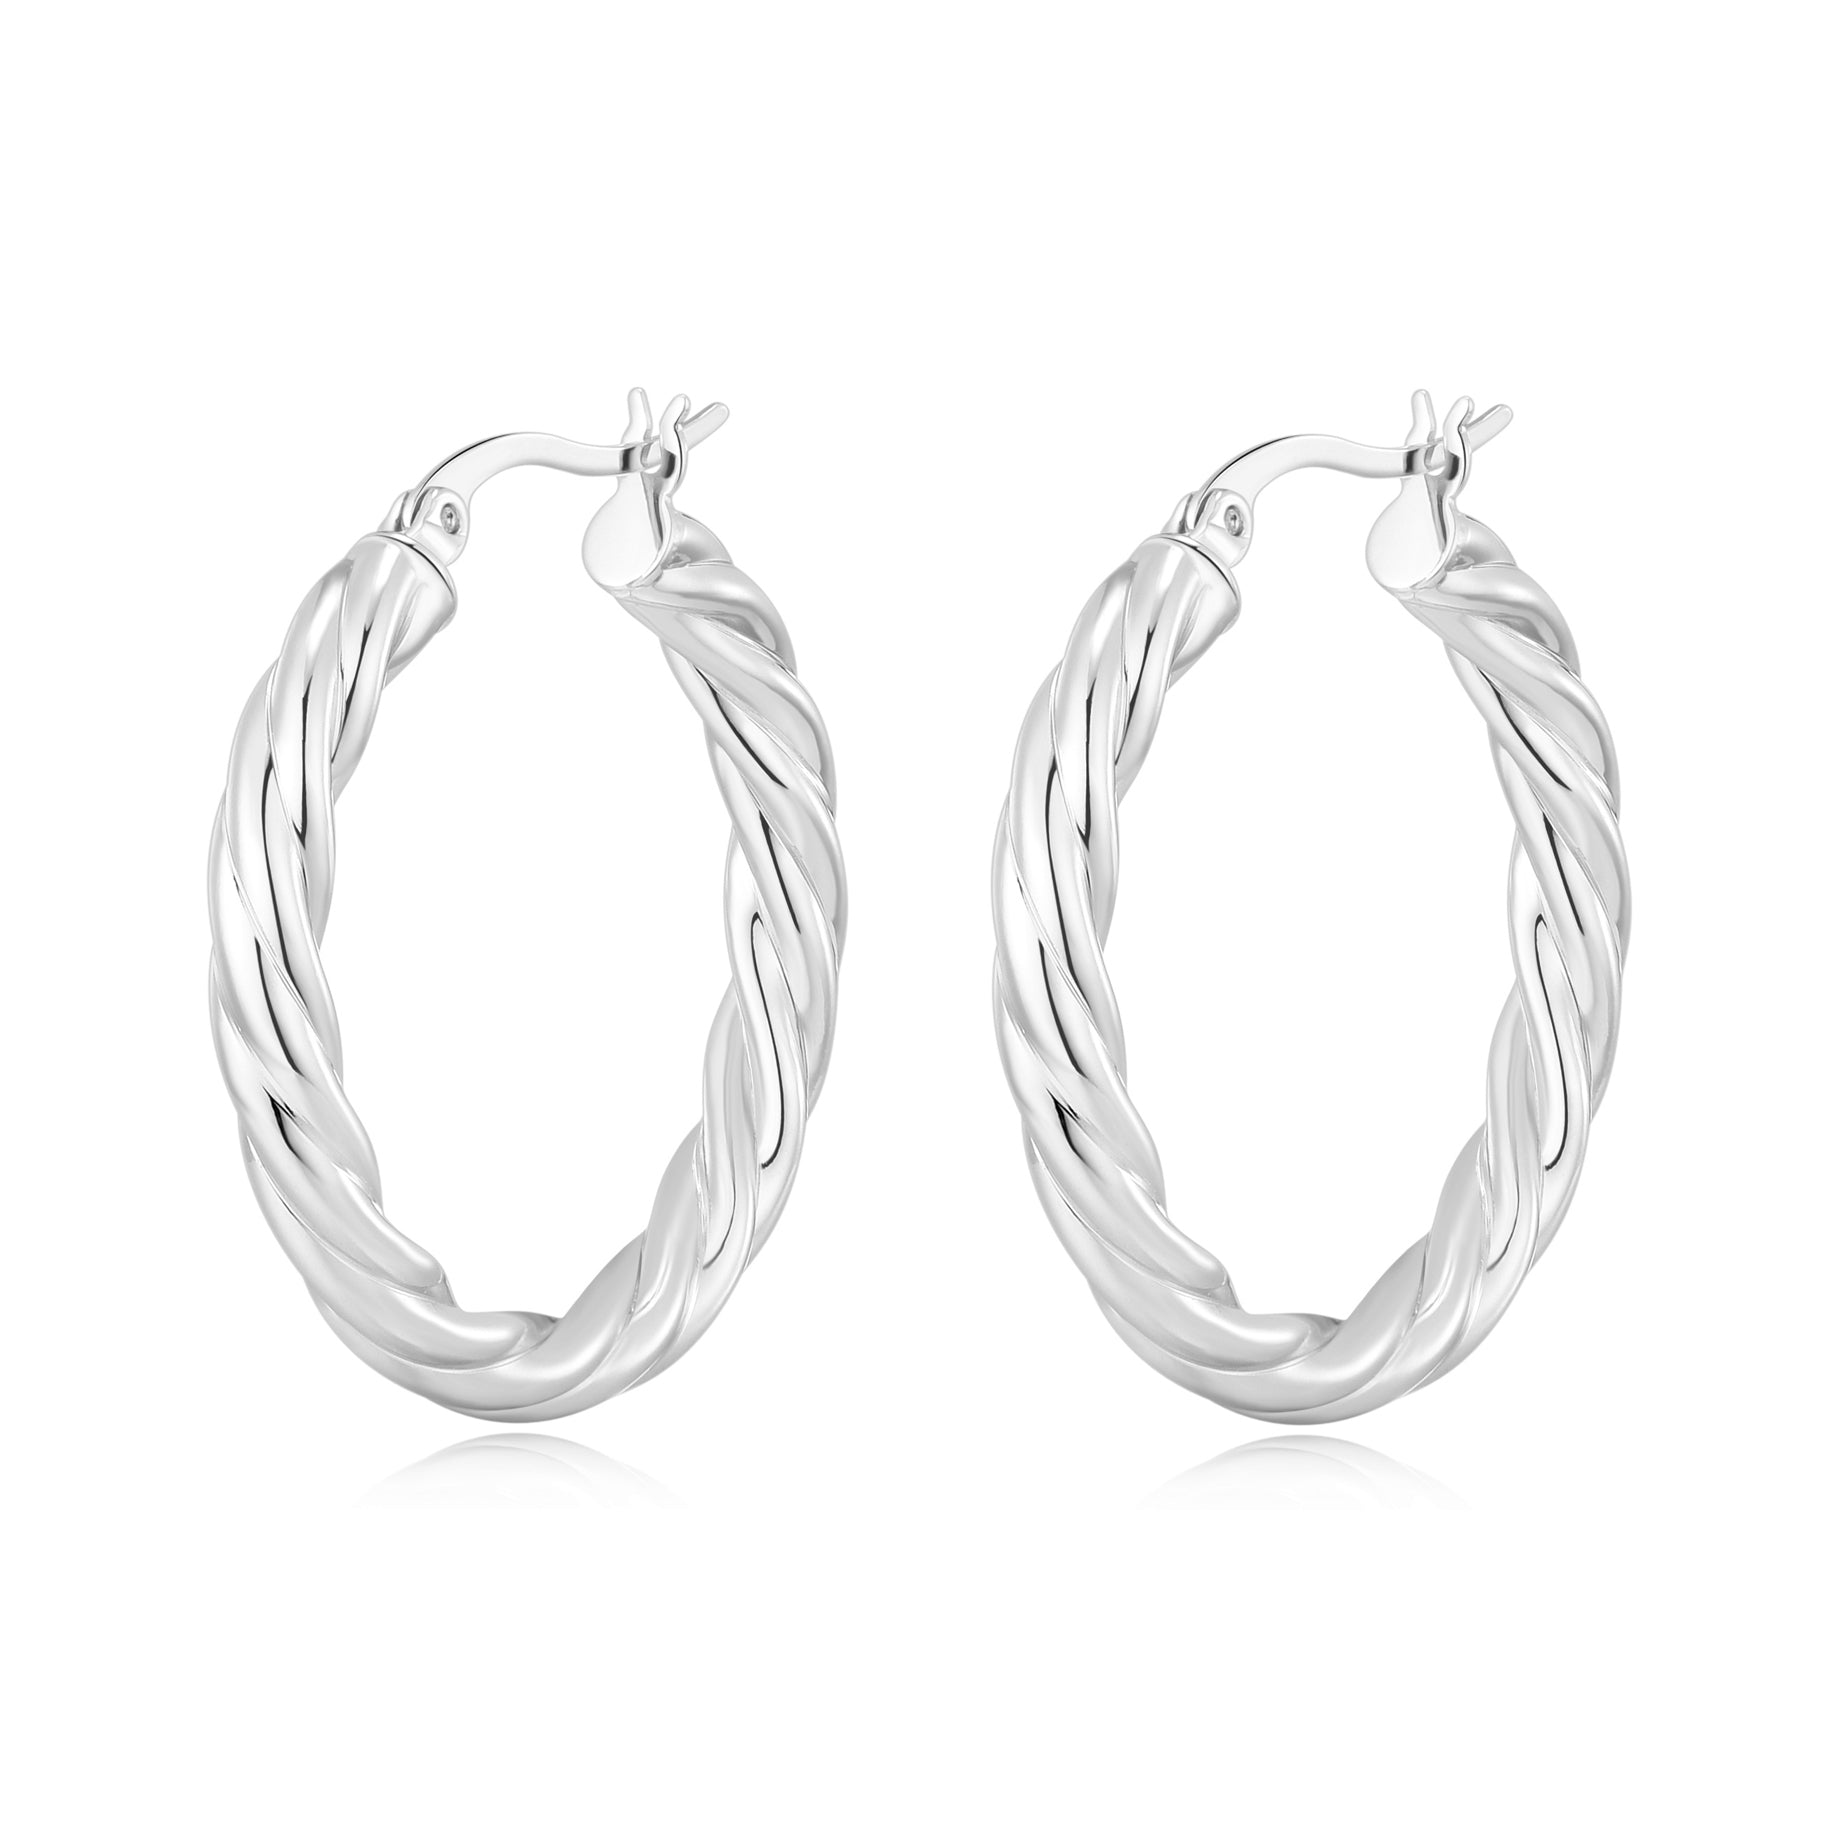 Silver Plated Thick Twisted Hoop Earrings by Philip Jones Jewellery